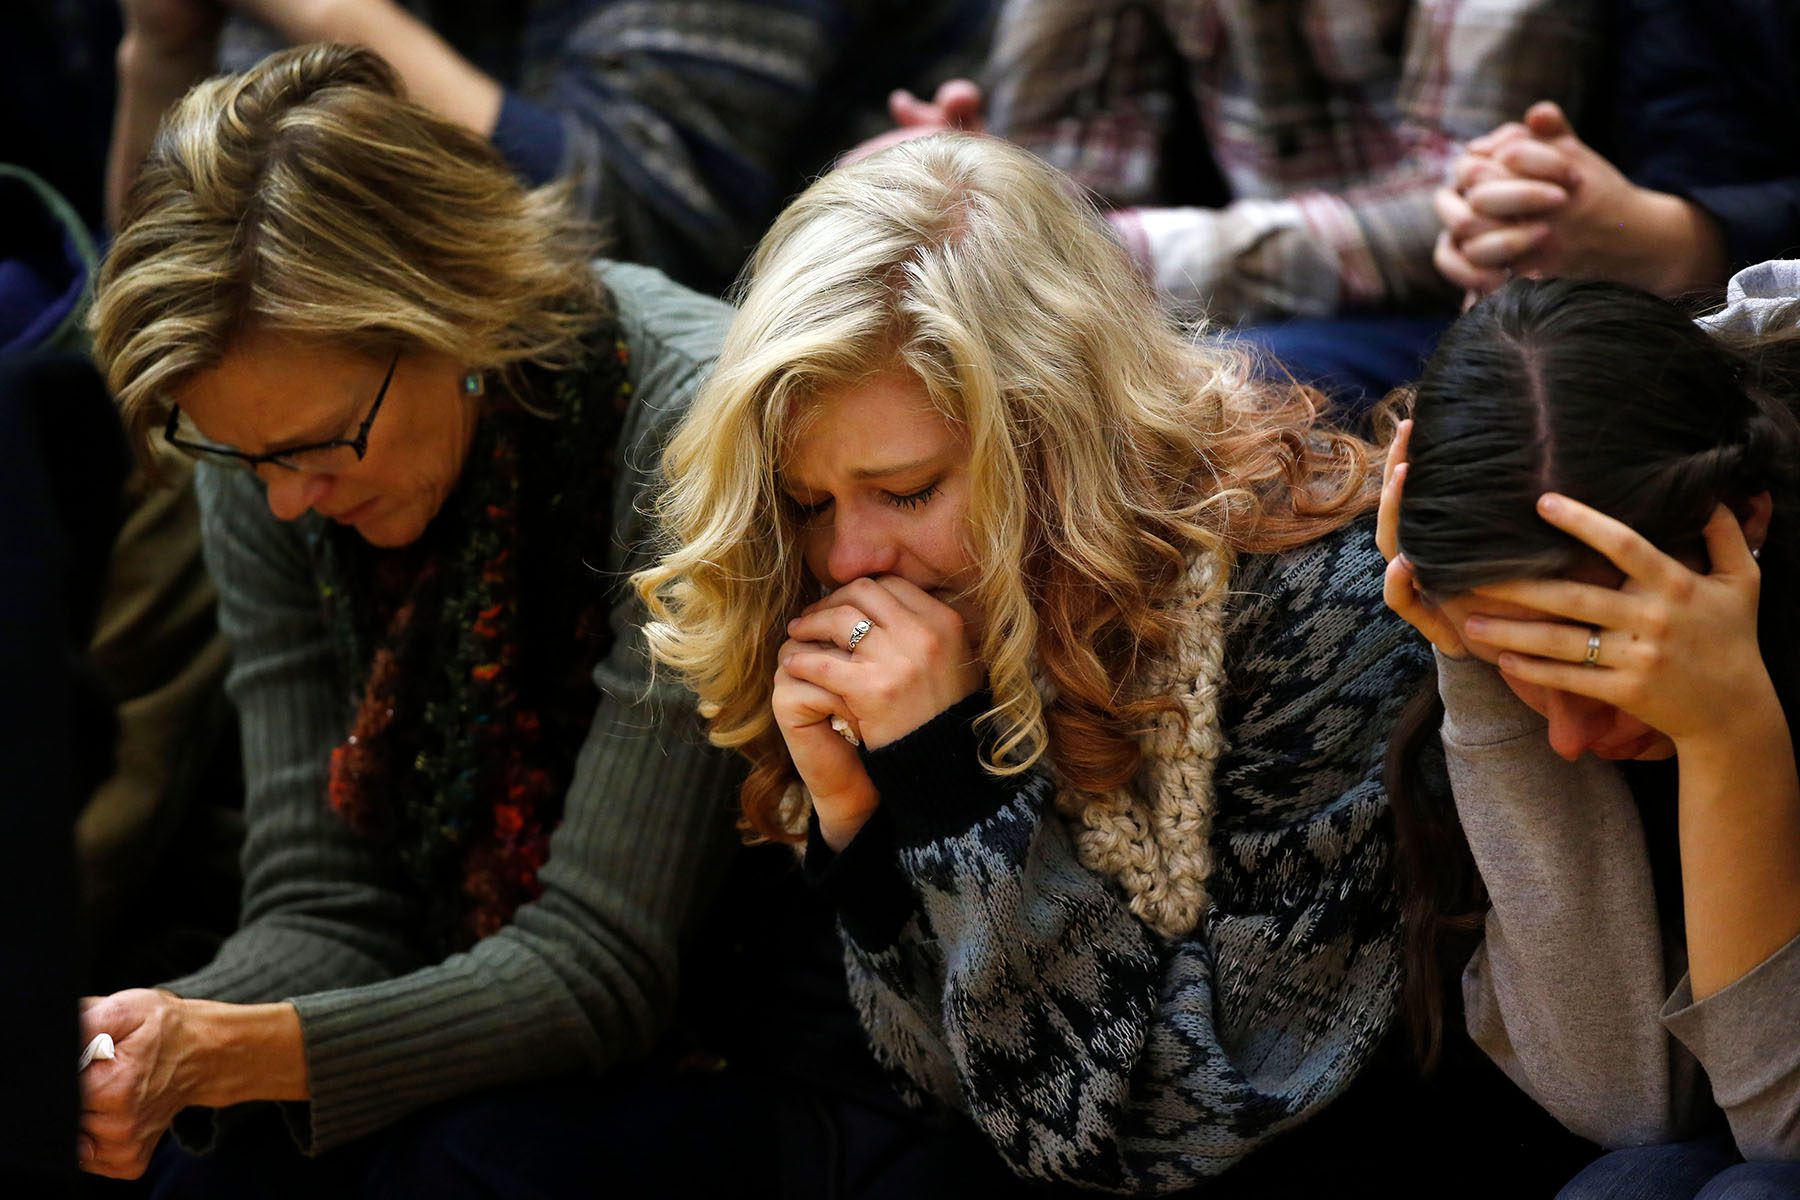 Women cry and during a vigil for those killed at the Planned Parenthood shooting.